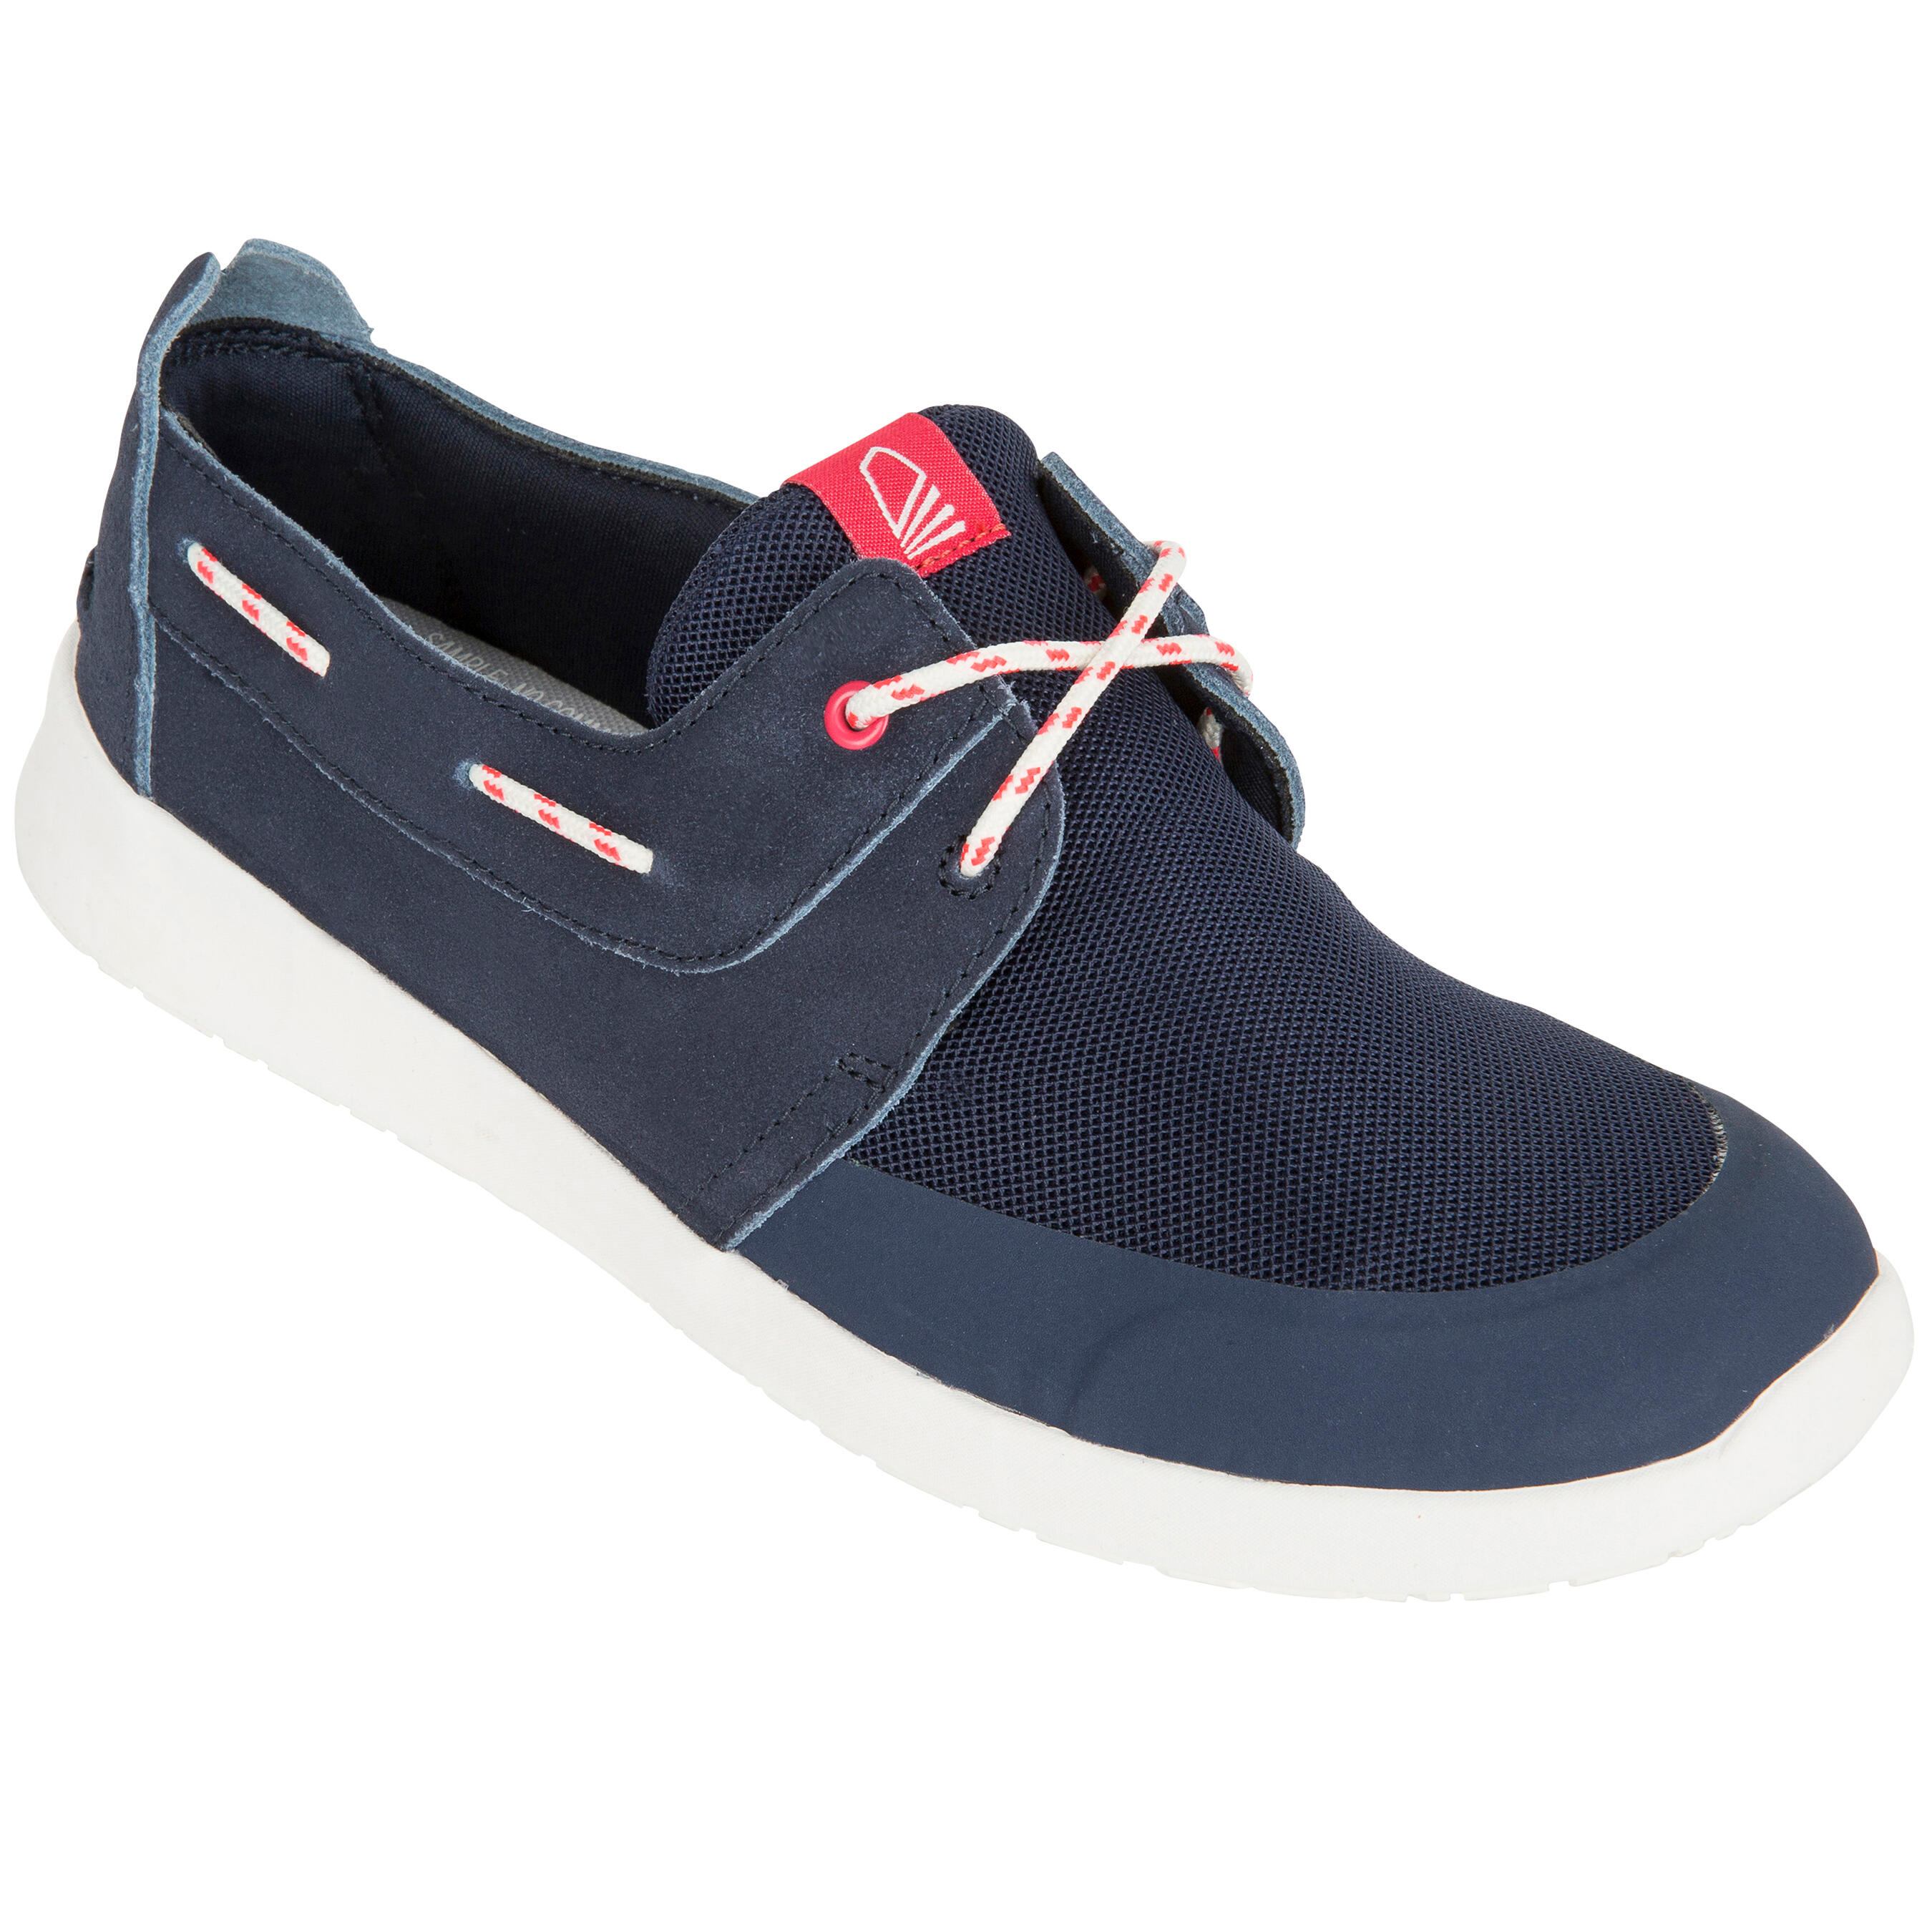 TRIBORD Cruise 100 Women's Leather Boat Shoes Dark Blue